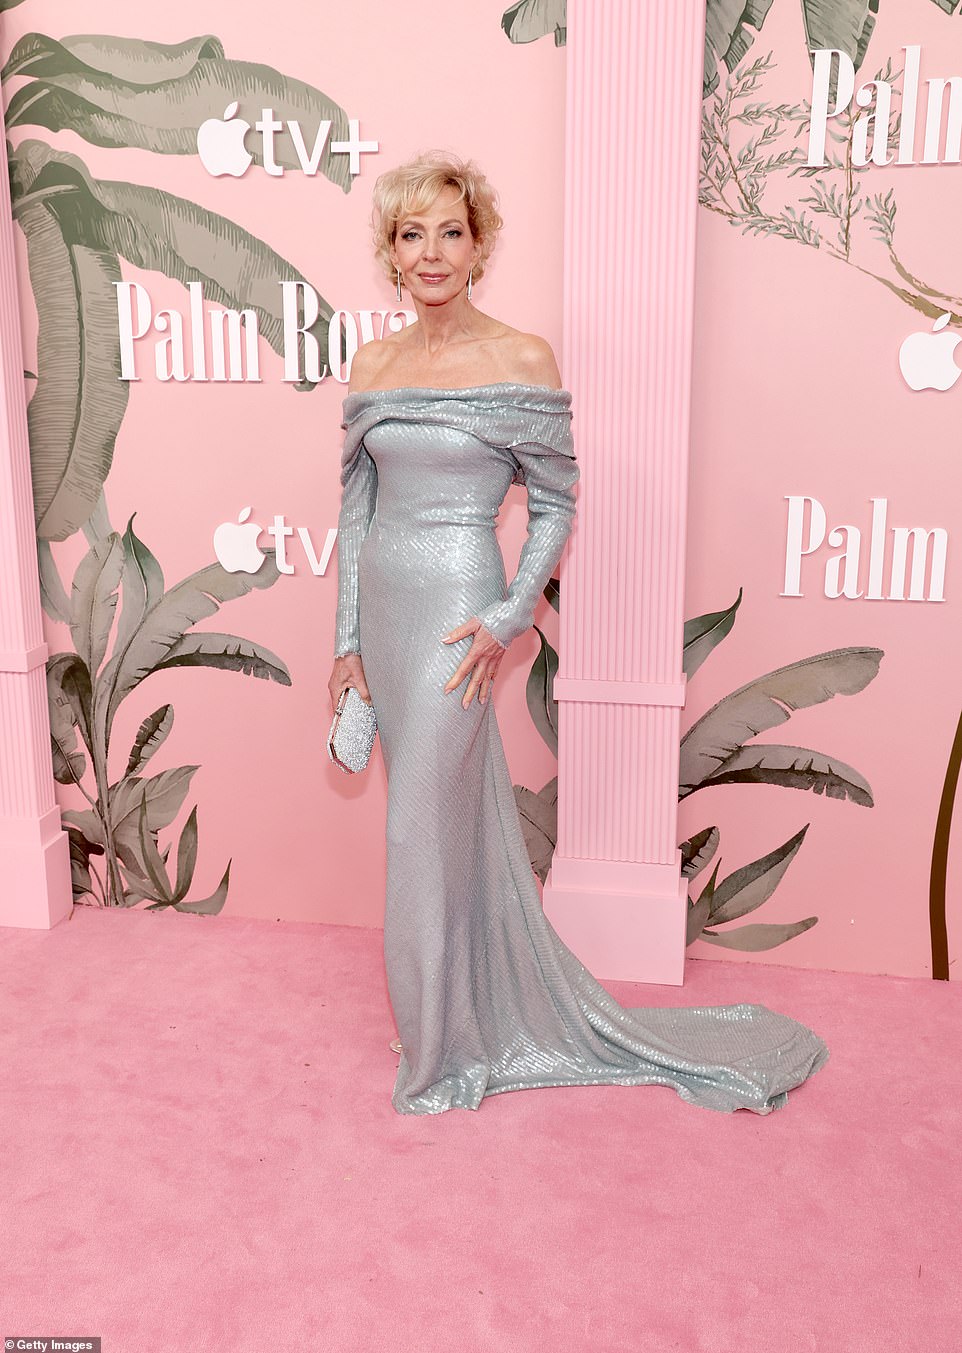 Allison Janney showed off her tiny waist in a sparkling silver sequined off-the-shoulder dress with an elegant train